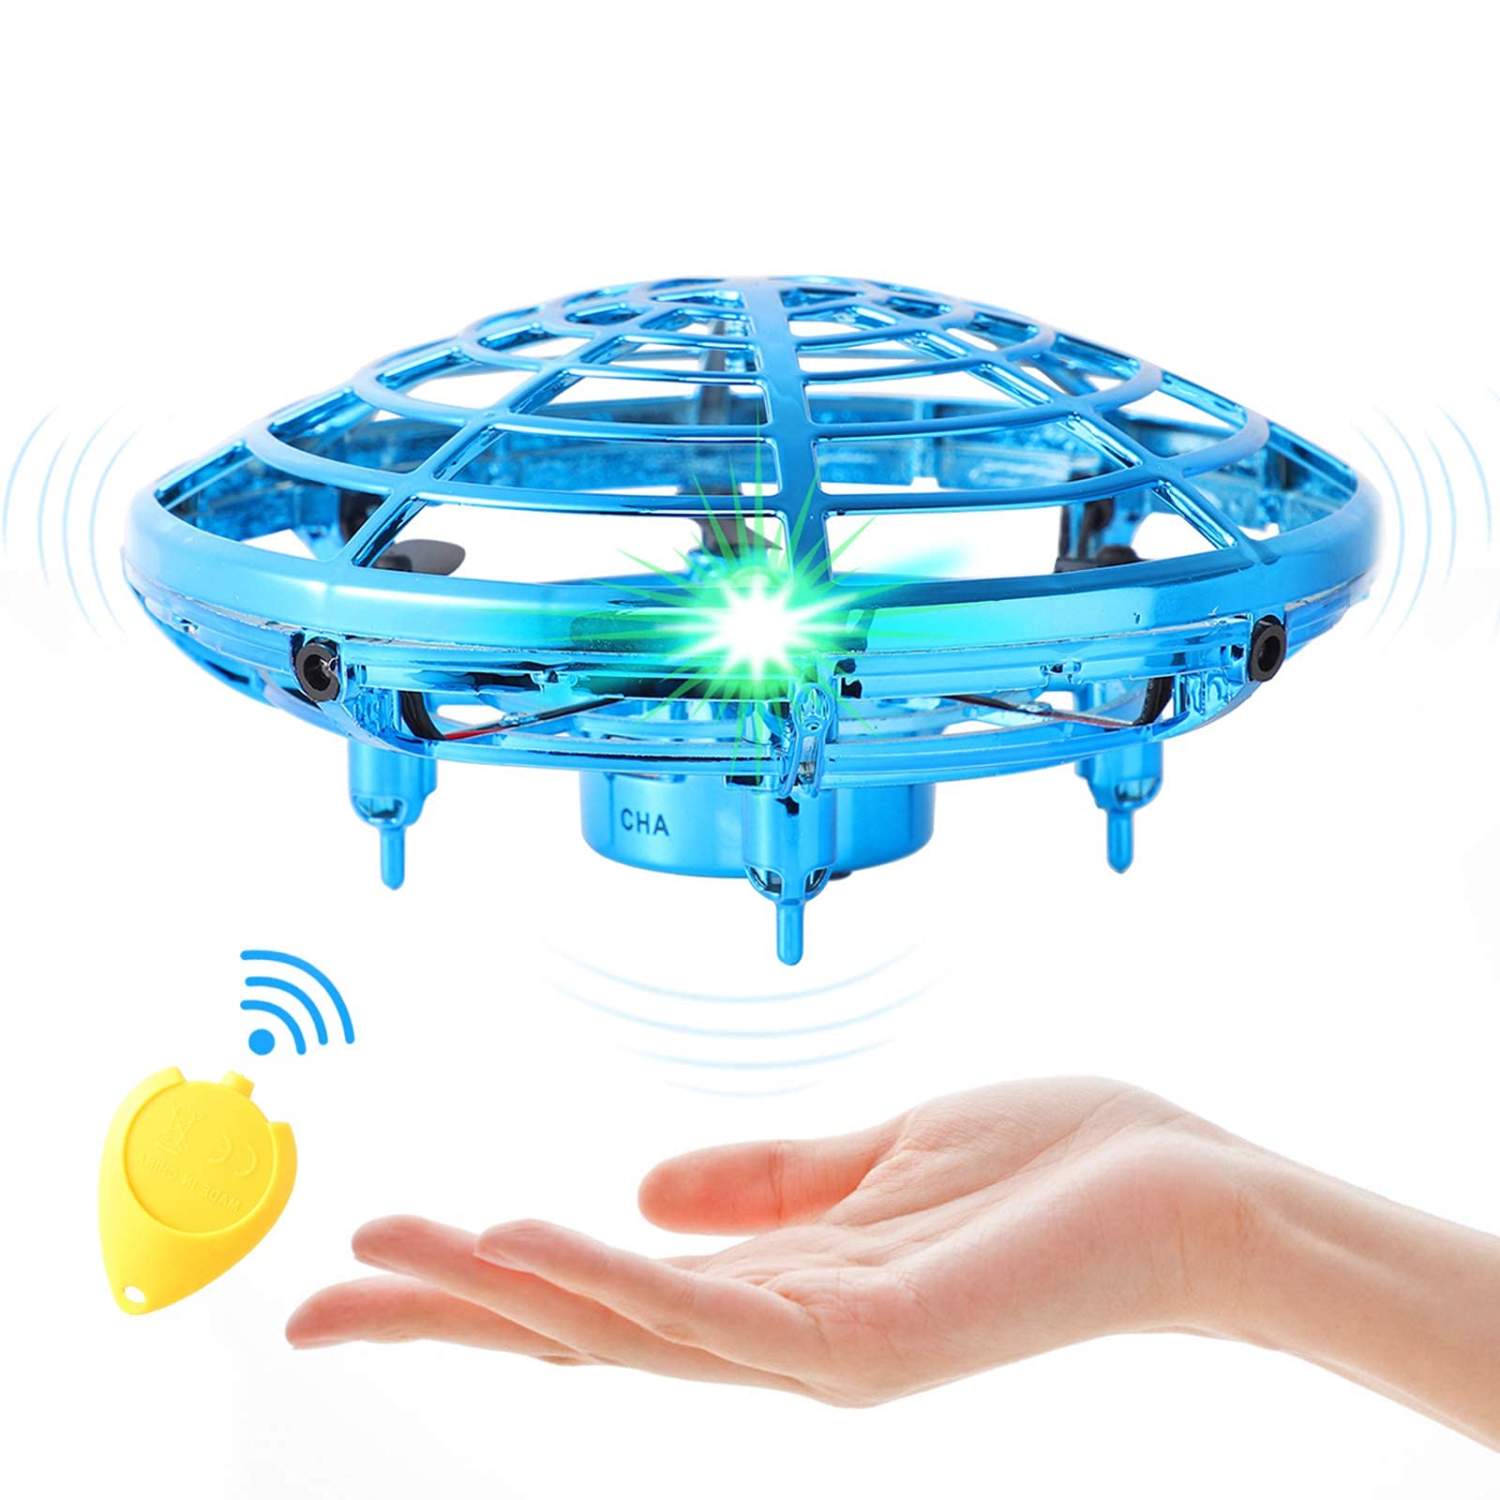 Flying Toy Mini Drone for Kid, Hand Controlled Flying Ball with LED Light, UFO Helicopter with 2 Speed, Easy Indoor Outdoor